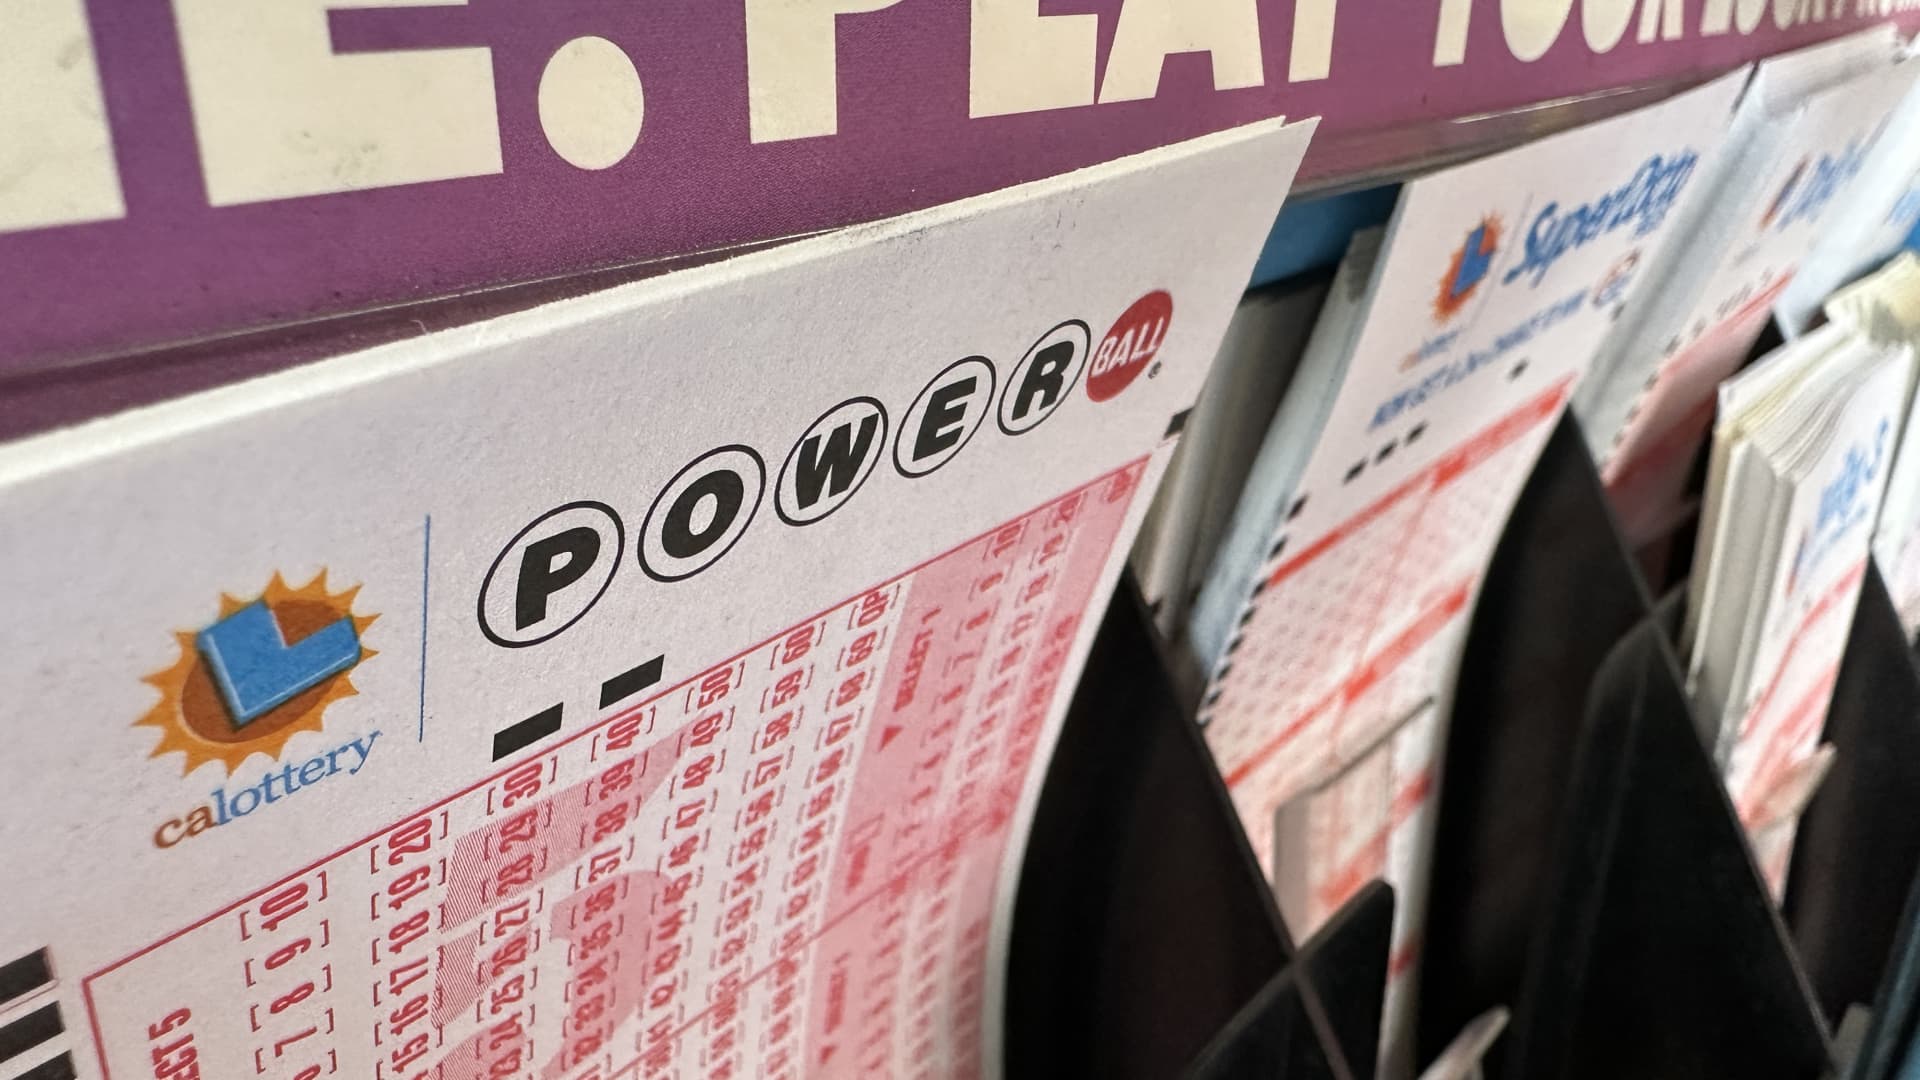 The Powerball jackpot is $1.9 billion only if you take the annuity. Here’s why the lump sum may be overrated